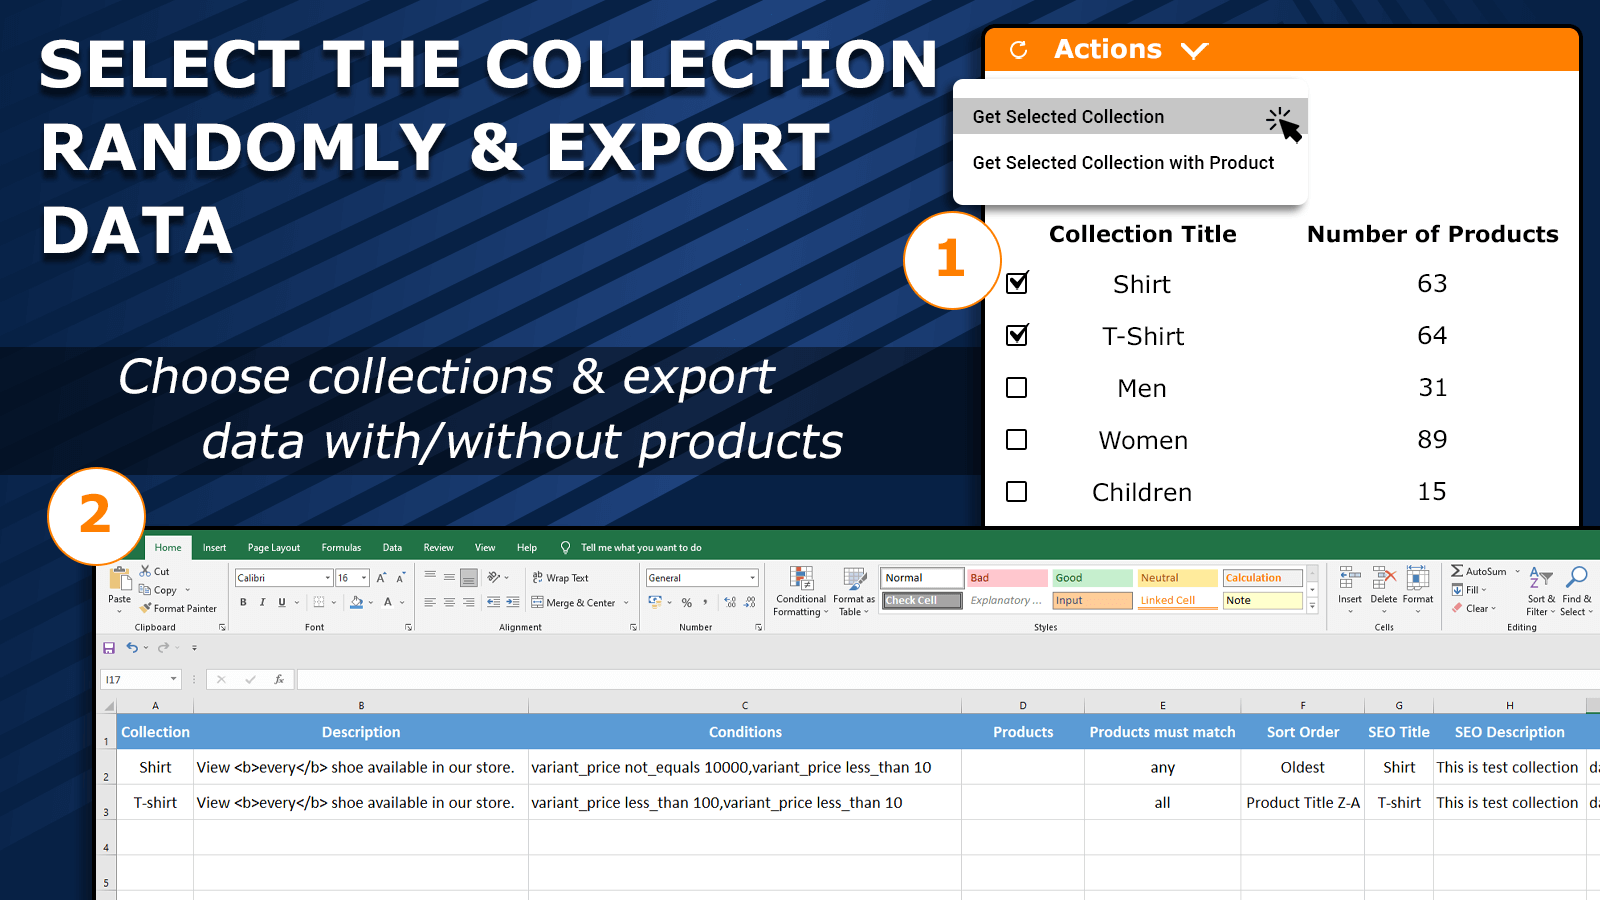 Select the collection randomly & export data